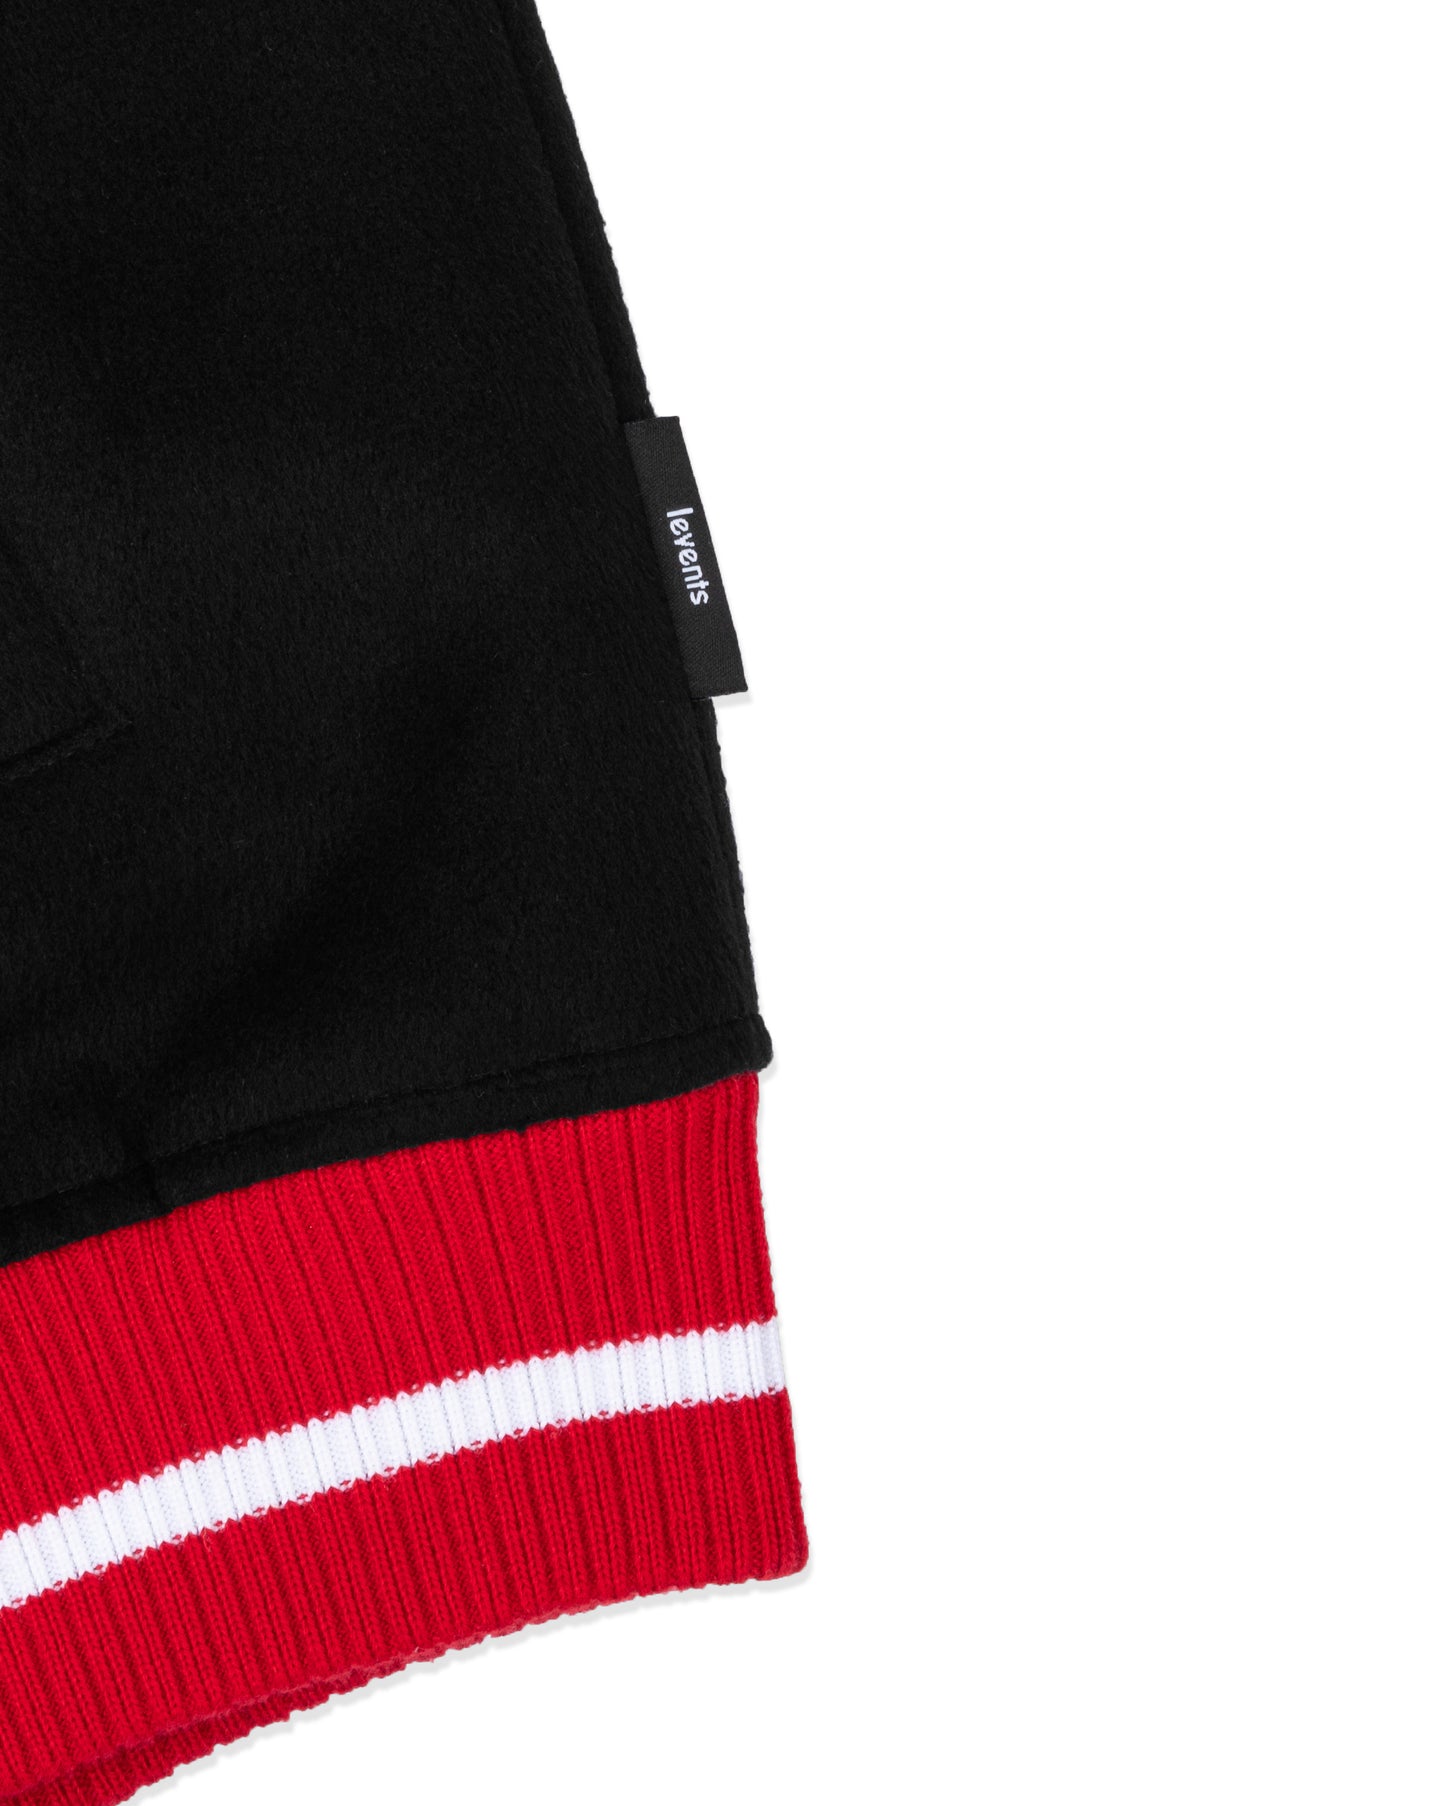 Levents® Punch Varsity Black/ Red